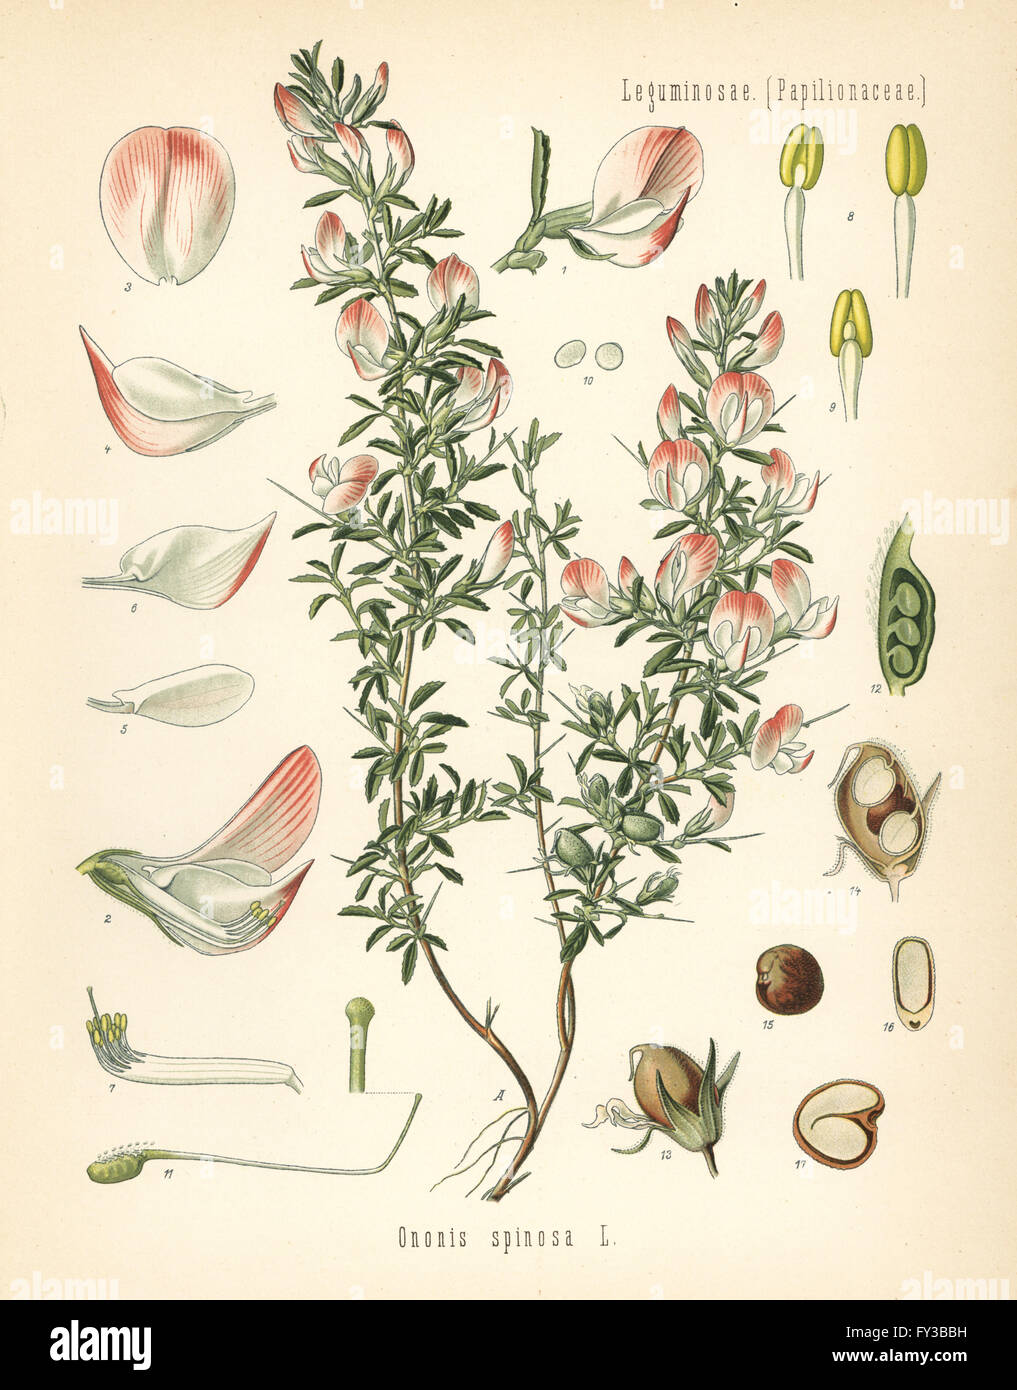 Spiny restharrow, Ononis spinosa. Chromolithograph after a botanical illustration from Hermann Adolph Koehler's Medicinal Plants, edited by Gustav Pabst, Koehler, Germany, 1887. Stock Photo